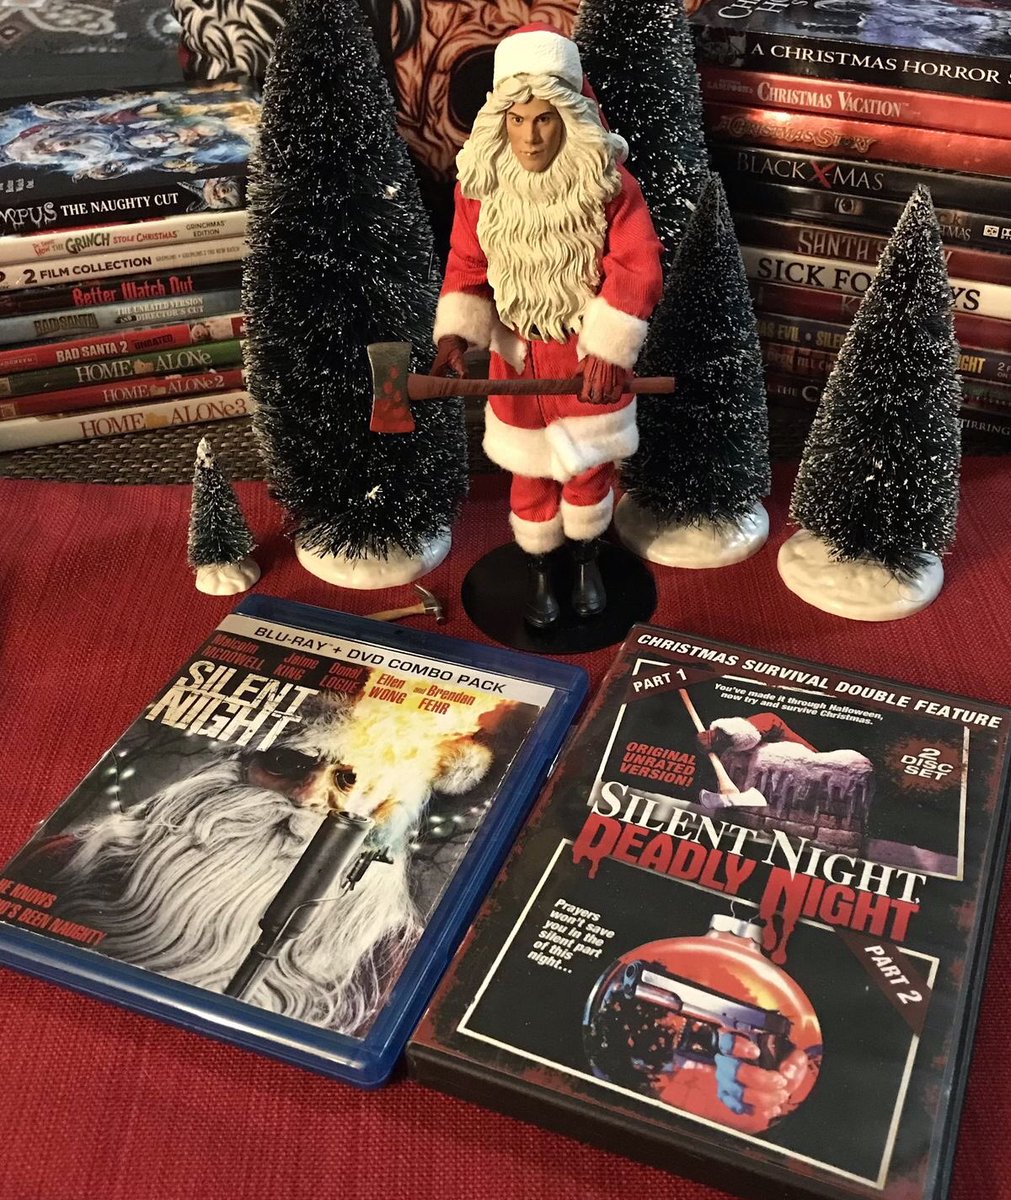 Time to watch some killer Santa movies
Silent Night~Silent Night, Deadly Night #HolidayMovies📺🍿🎄🪓